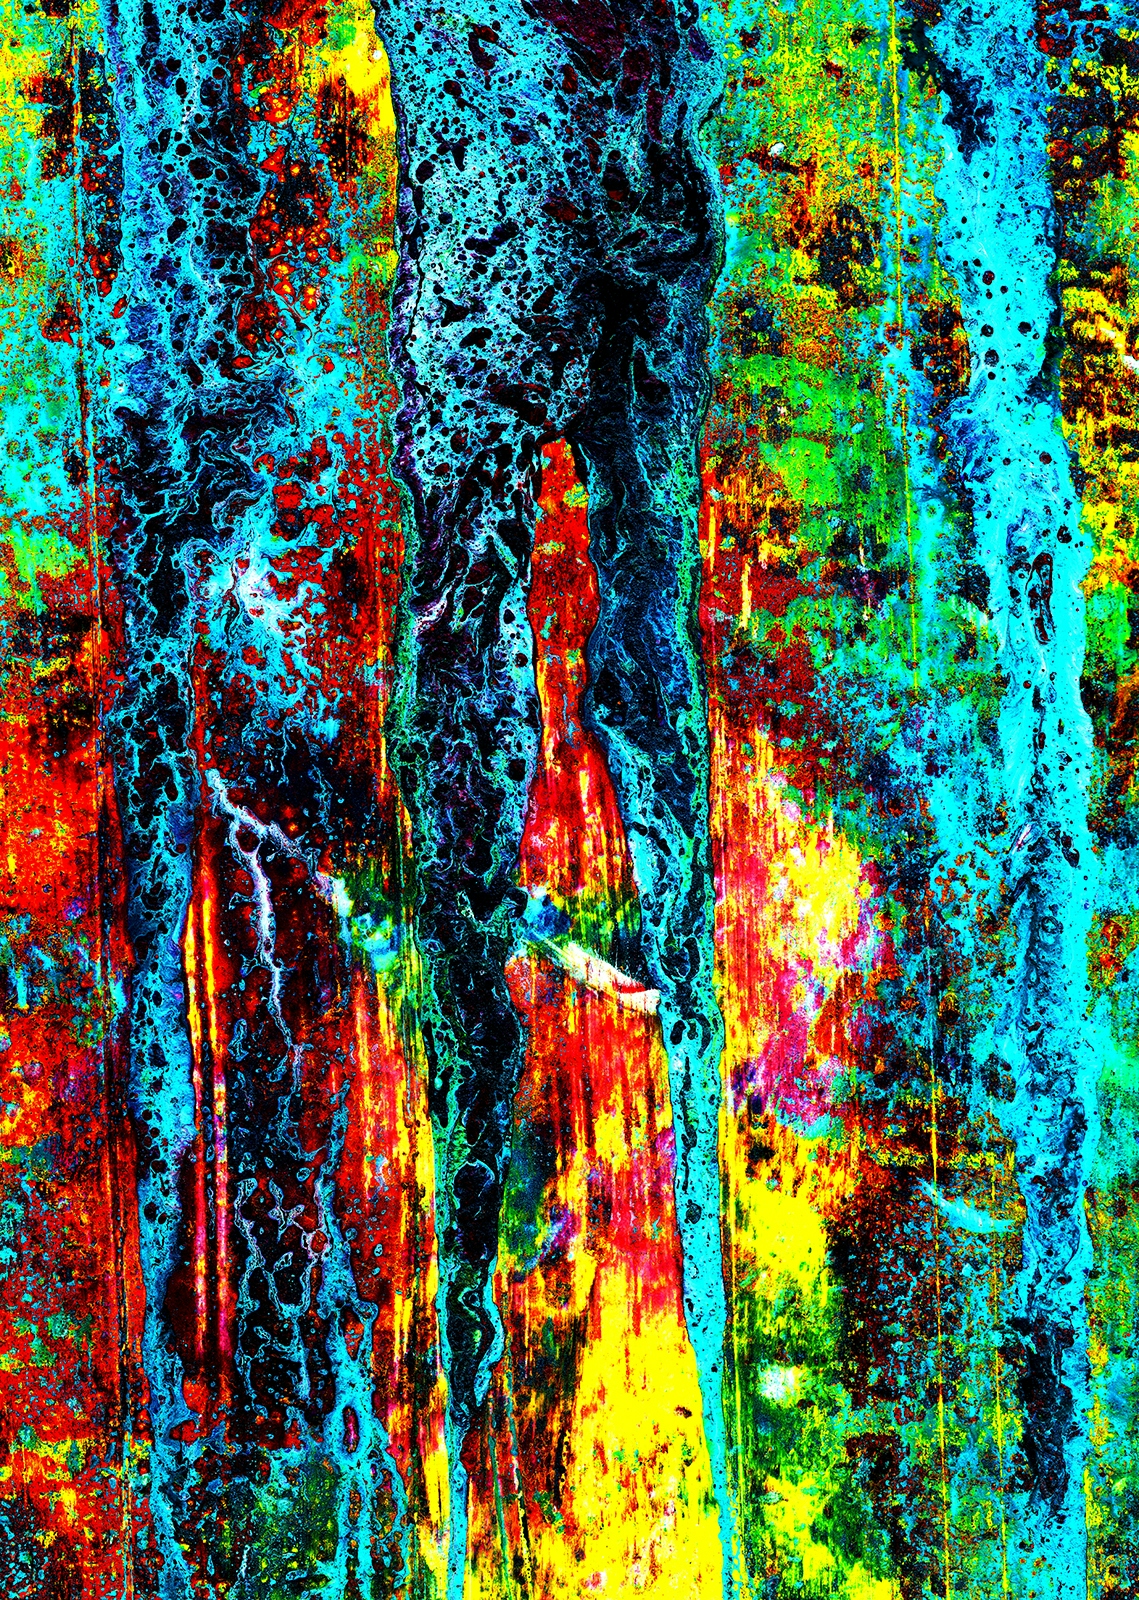 Brightly coloured abstract painting; predominantly blue, green, red, yellow and black.